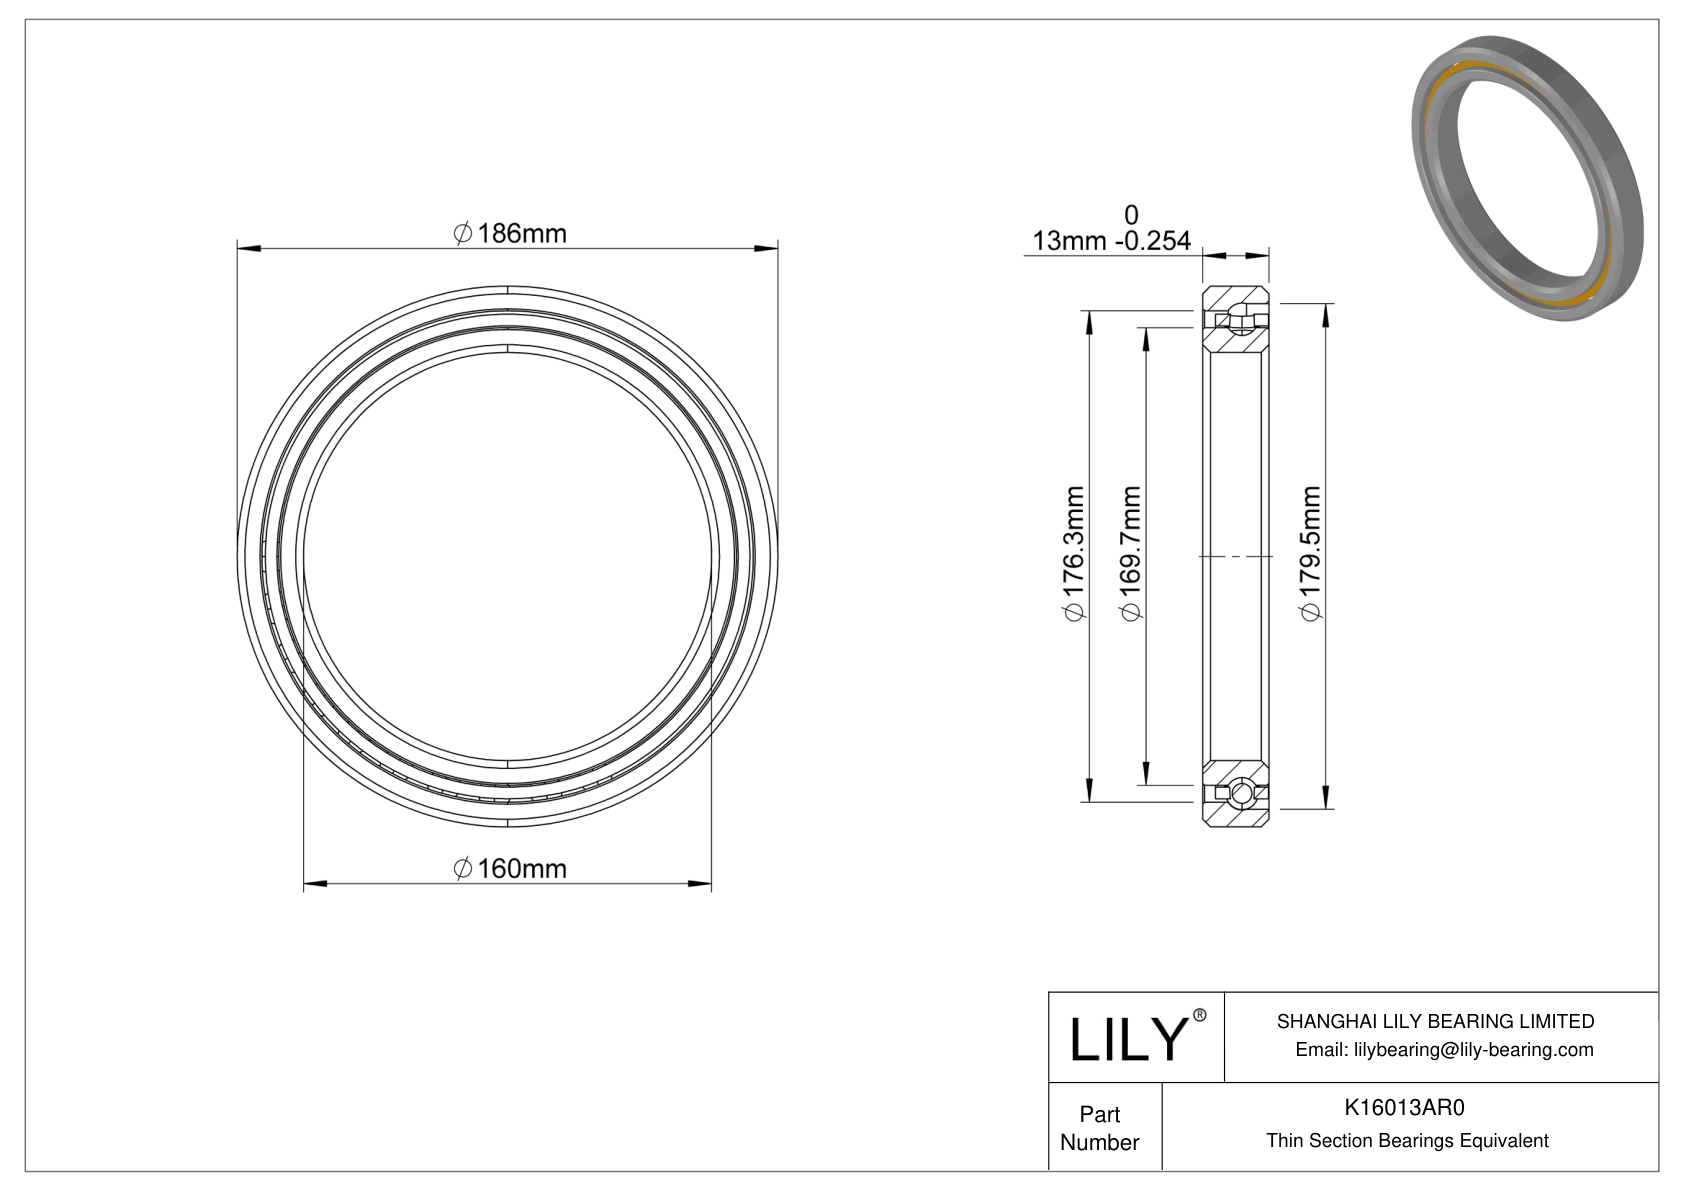 K16013AR0 Constant Section (CS) Bearings cad drawing